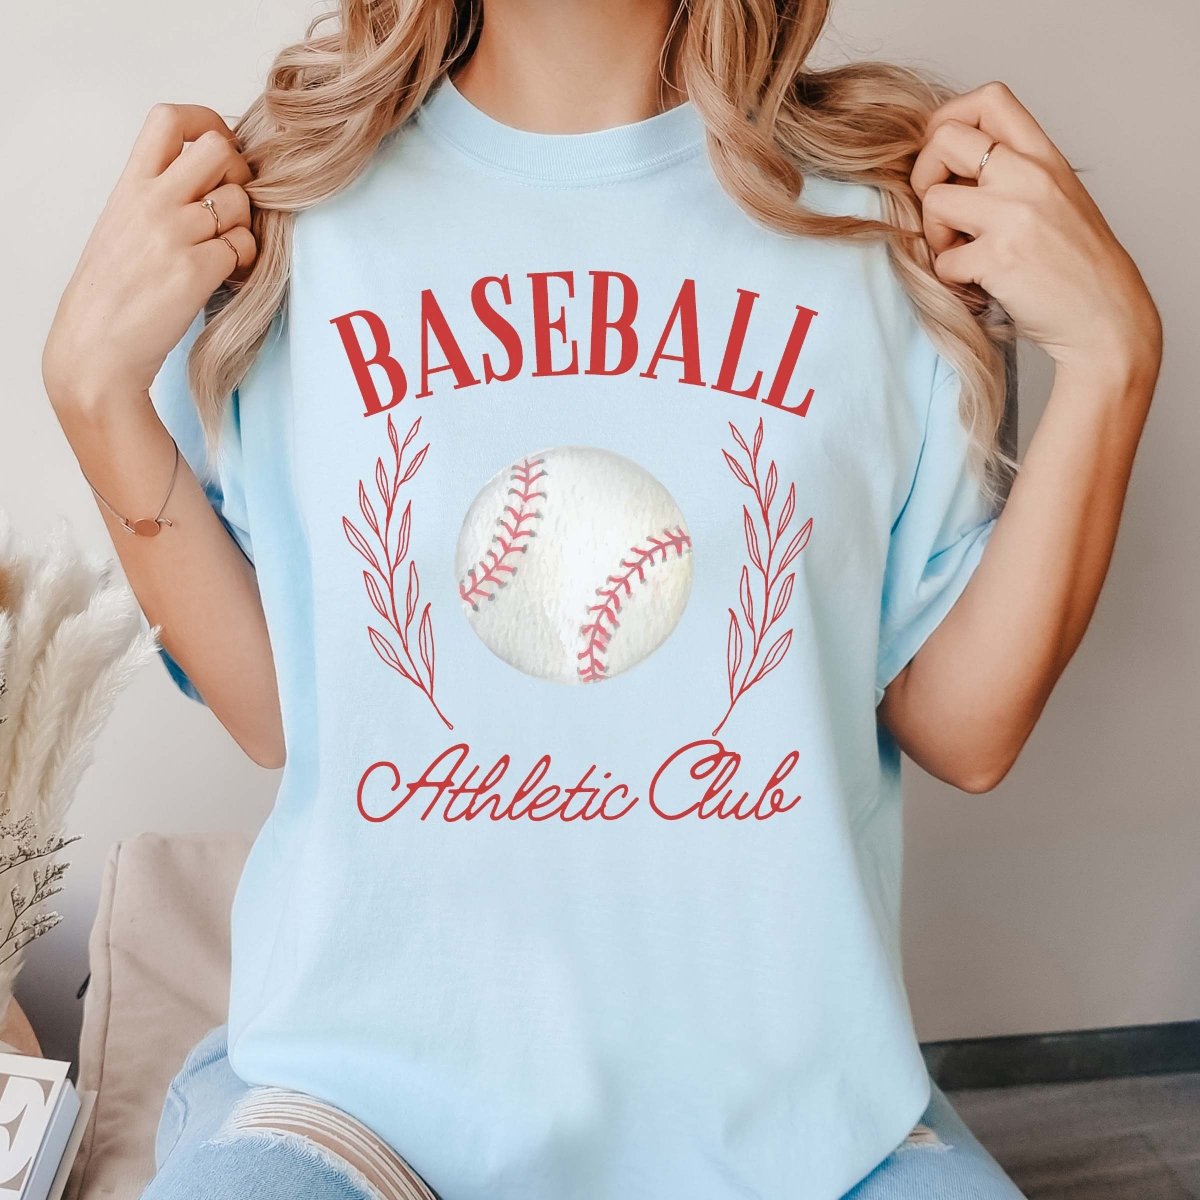 Baseball Athletic Club Comfort Color Wholesale Tee - Hot Item - Limeberry Designs